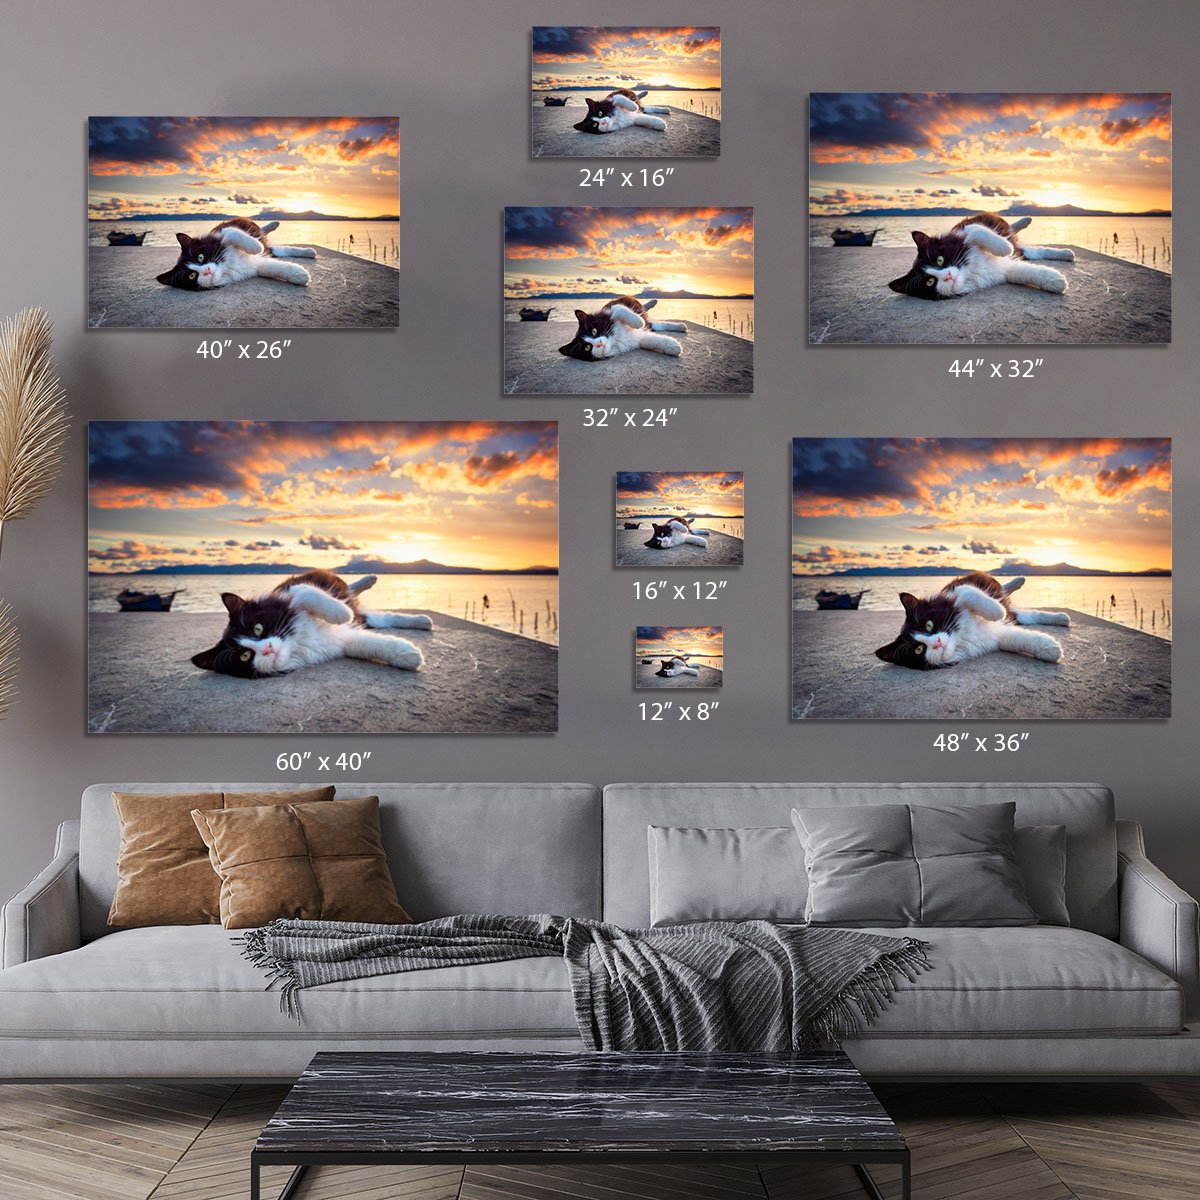 Black and white cat lying under a dramatic sunset on the lagoon Canvas Print or Poster